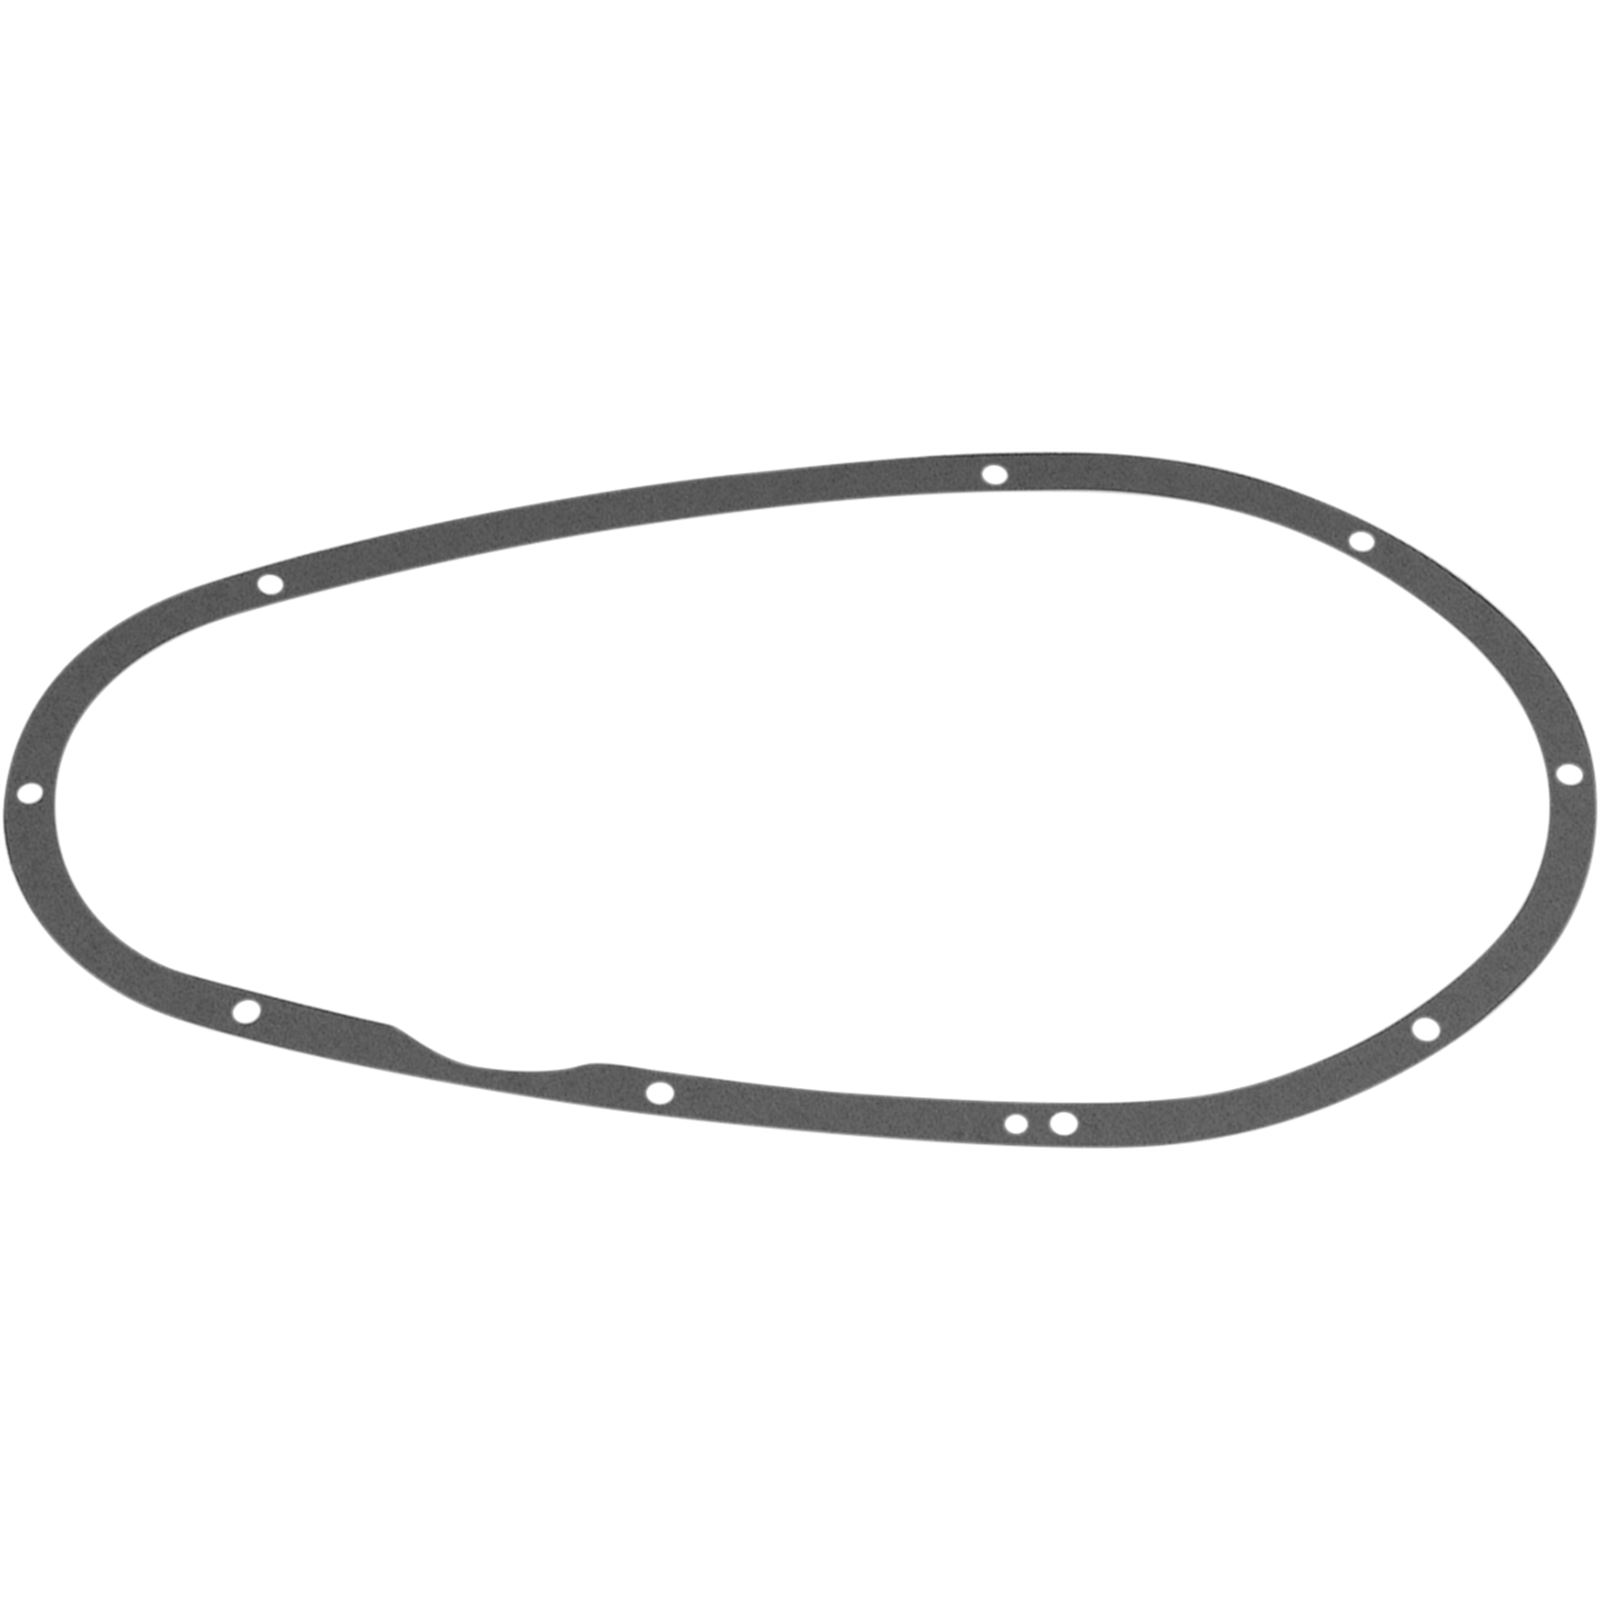 James Gaskets Primary Gasket .62" XL